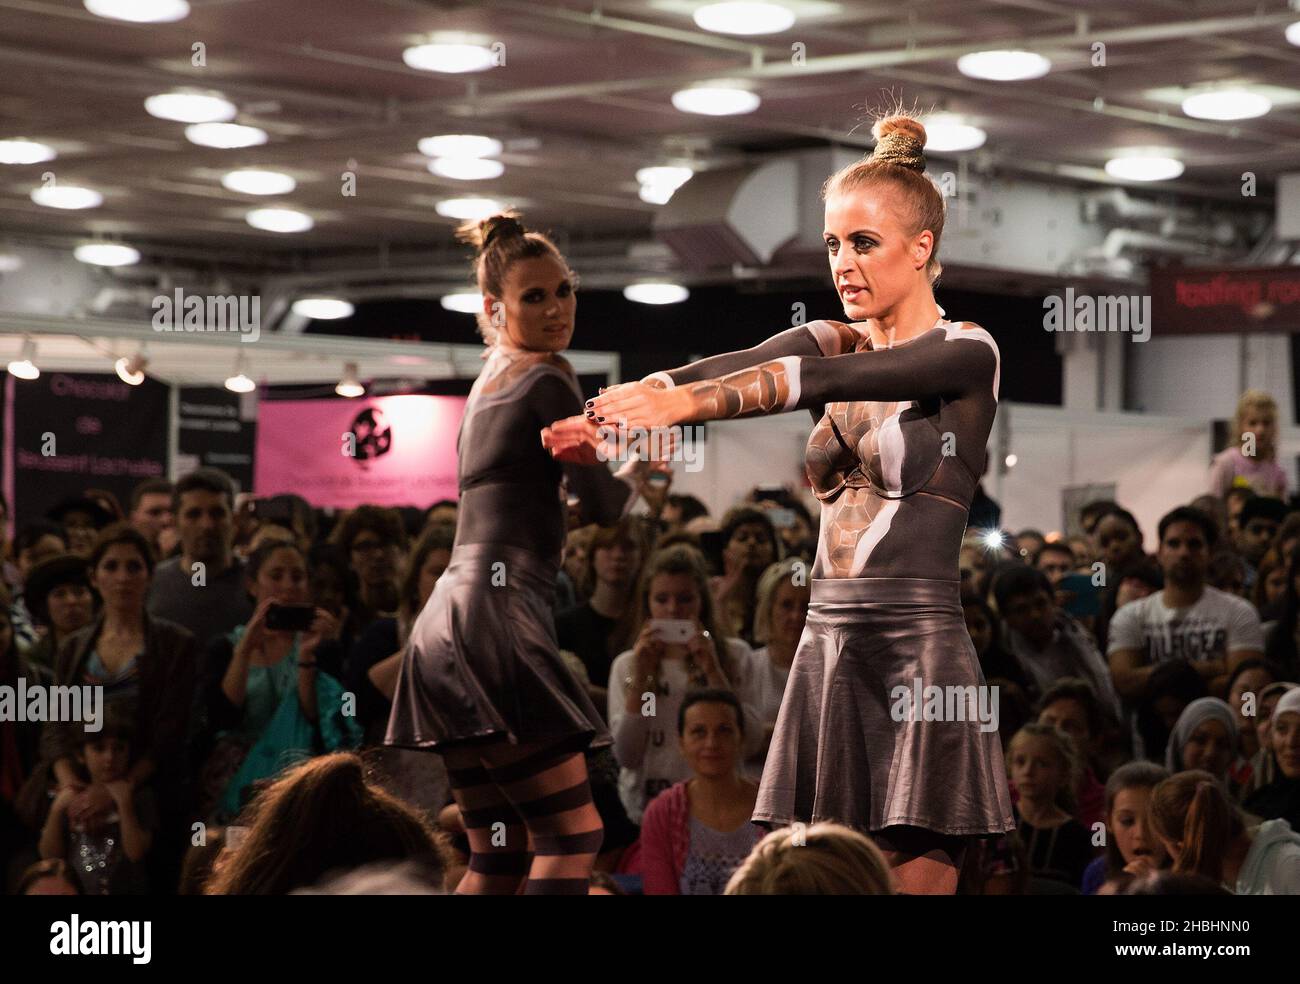 The Chocolate Show Fashion Models on Catwalk at Olympia in London. Stock Photo